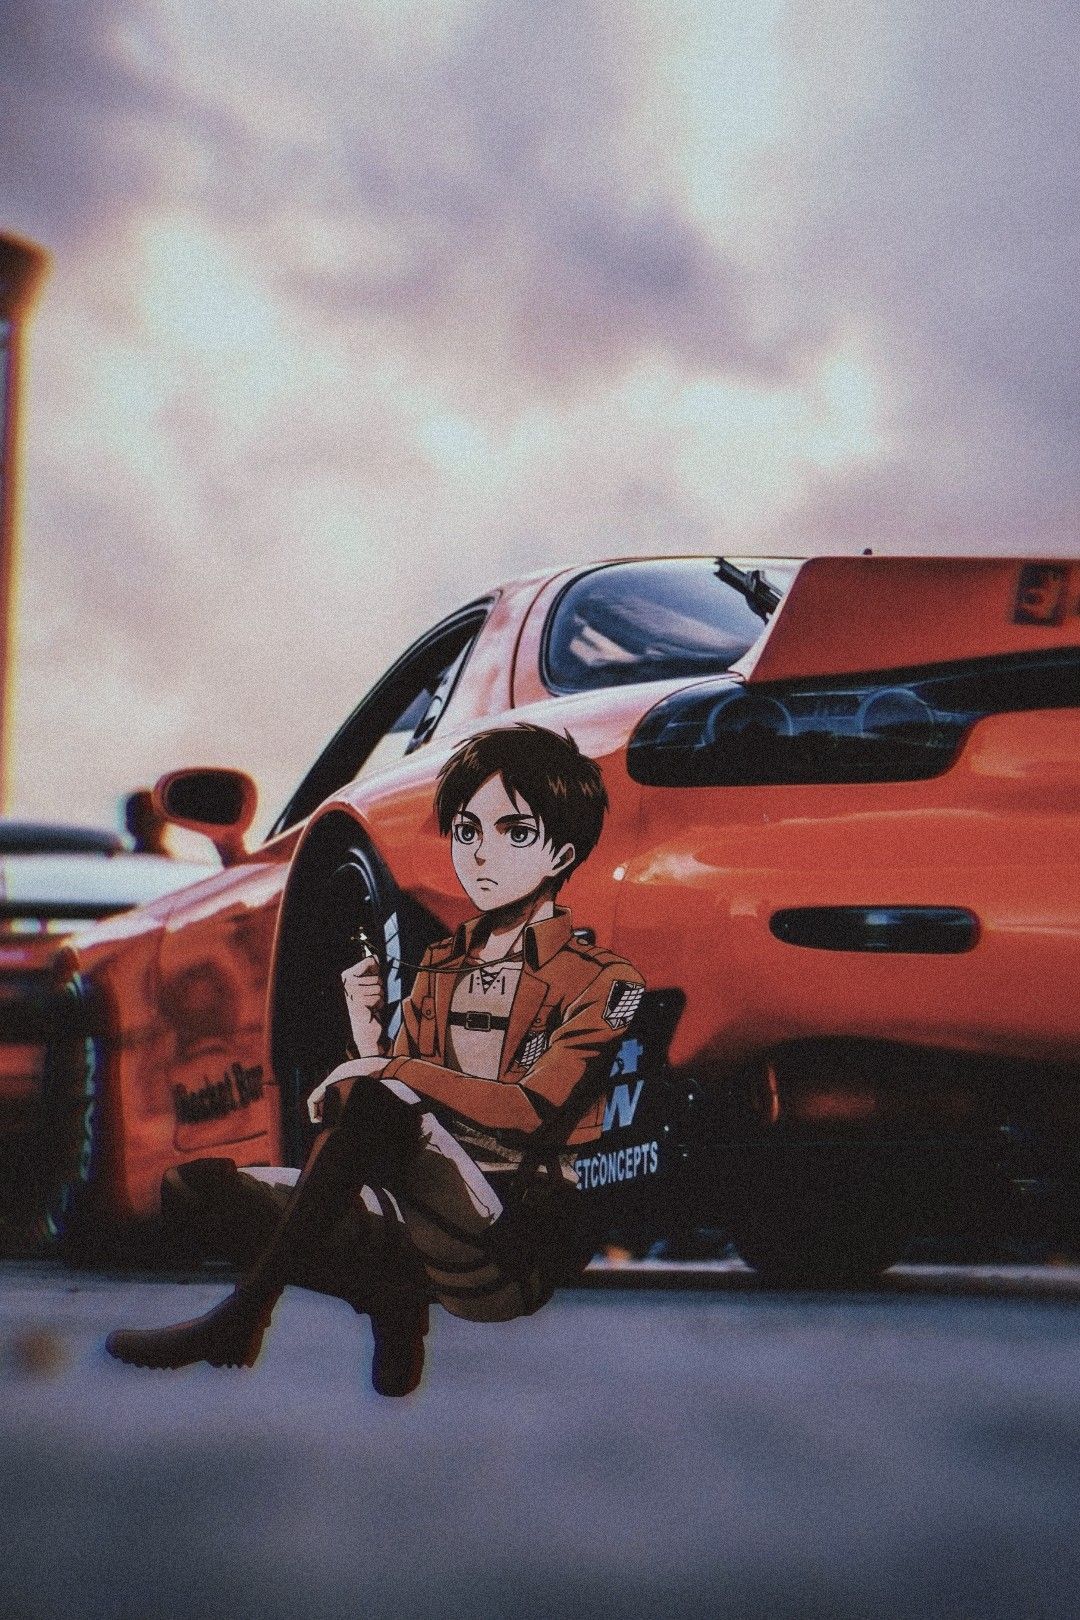 Anime JDM Car Aesthetic And Girls Vaporwave Decorative Painting Canvas  Poster 12x12inch(30x30cm) : Amazon.co.uk: Home & Kitchen